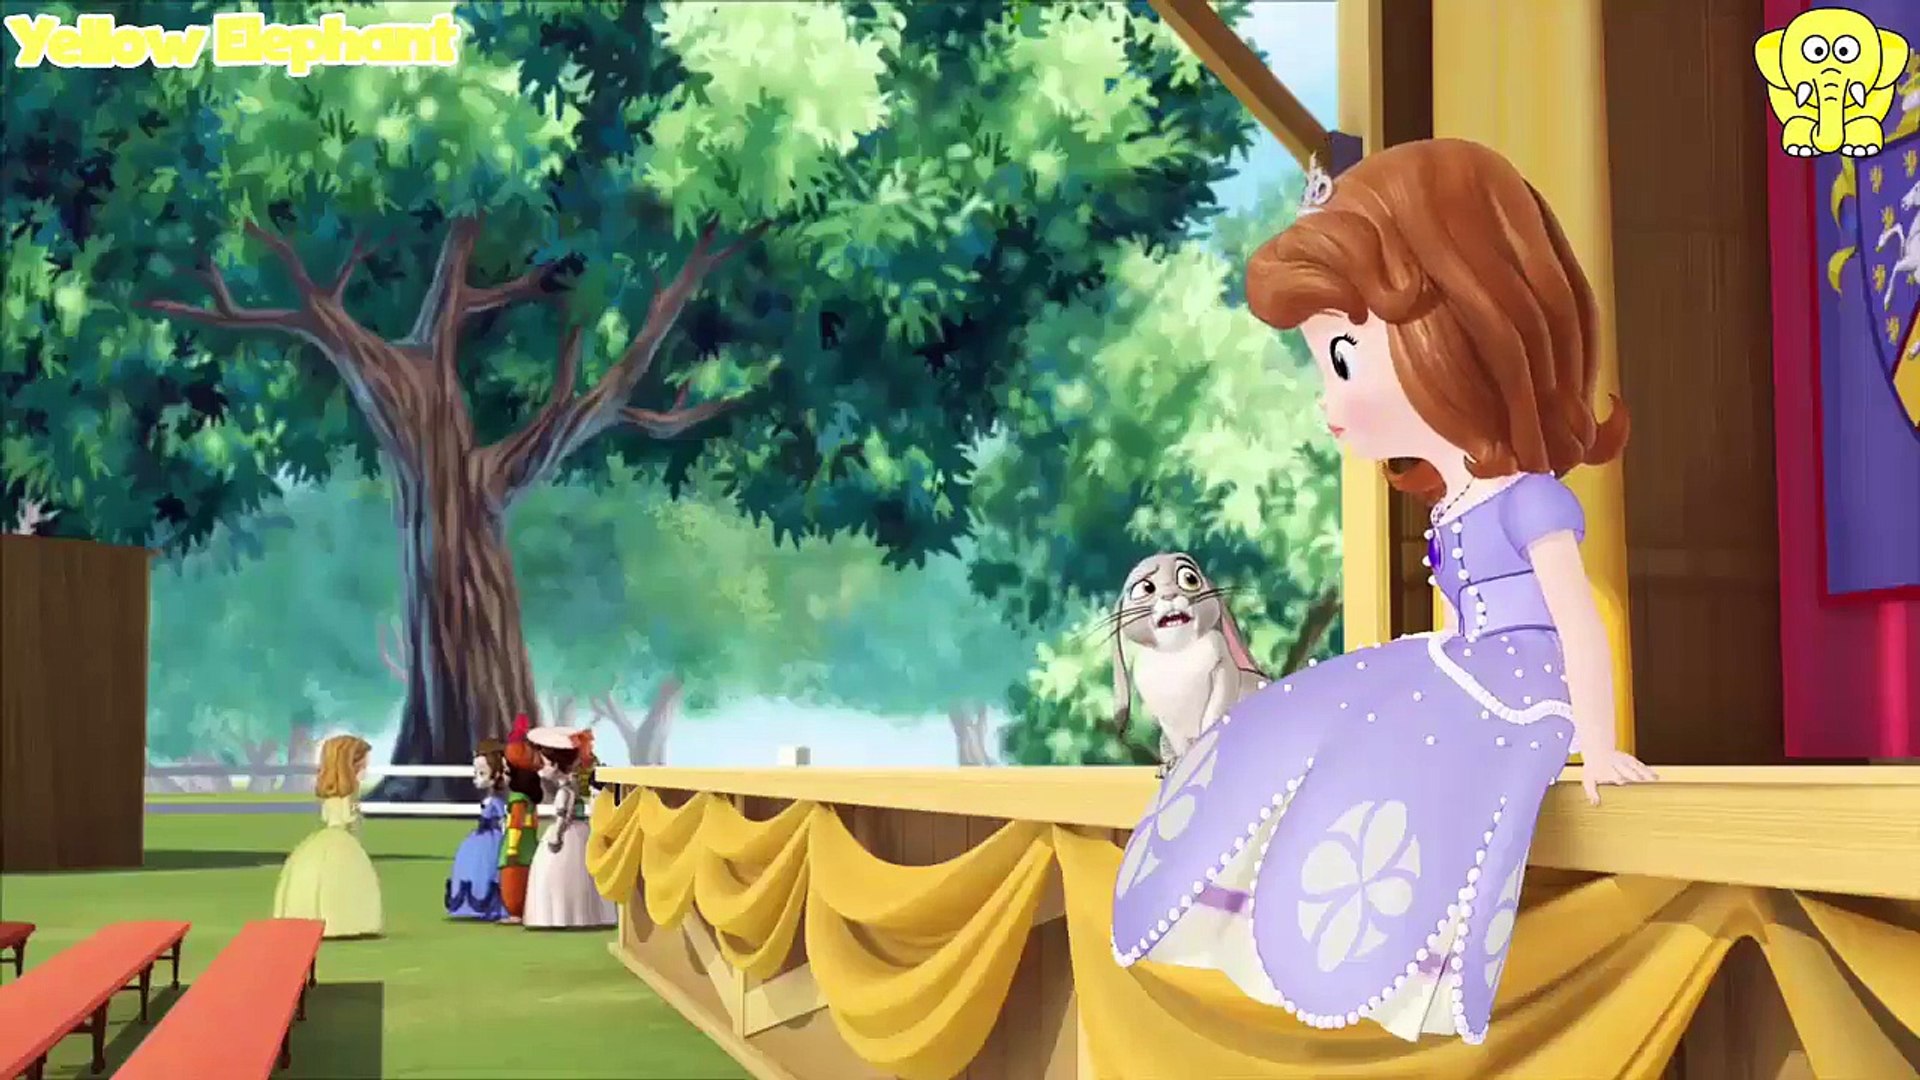 Sofia The First Lovely Moments Top Cartoon For Kids And Children Part 660 -  Yellow Elephant - video Dailymotion